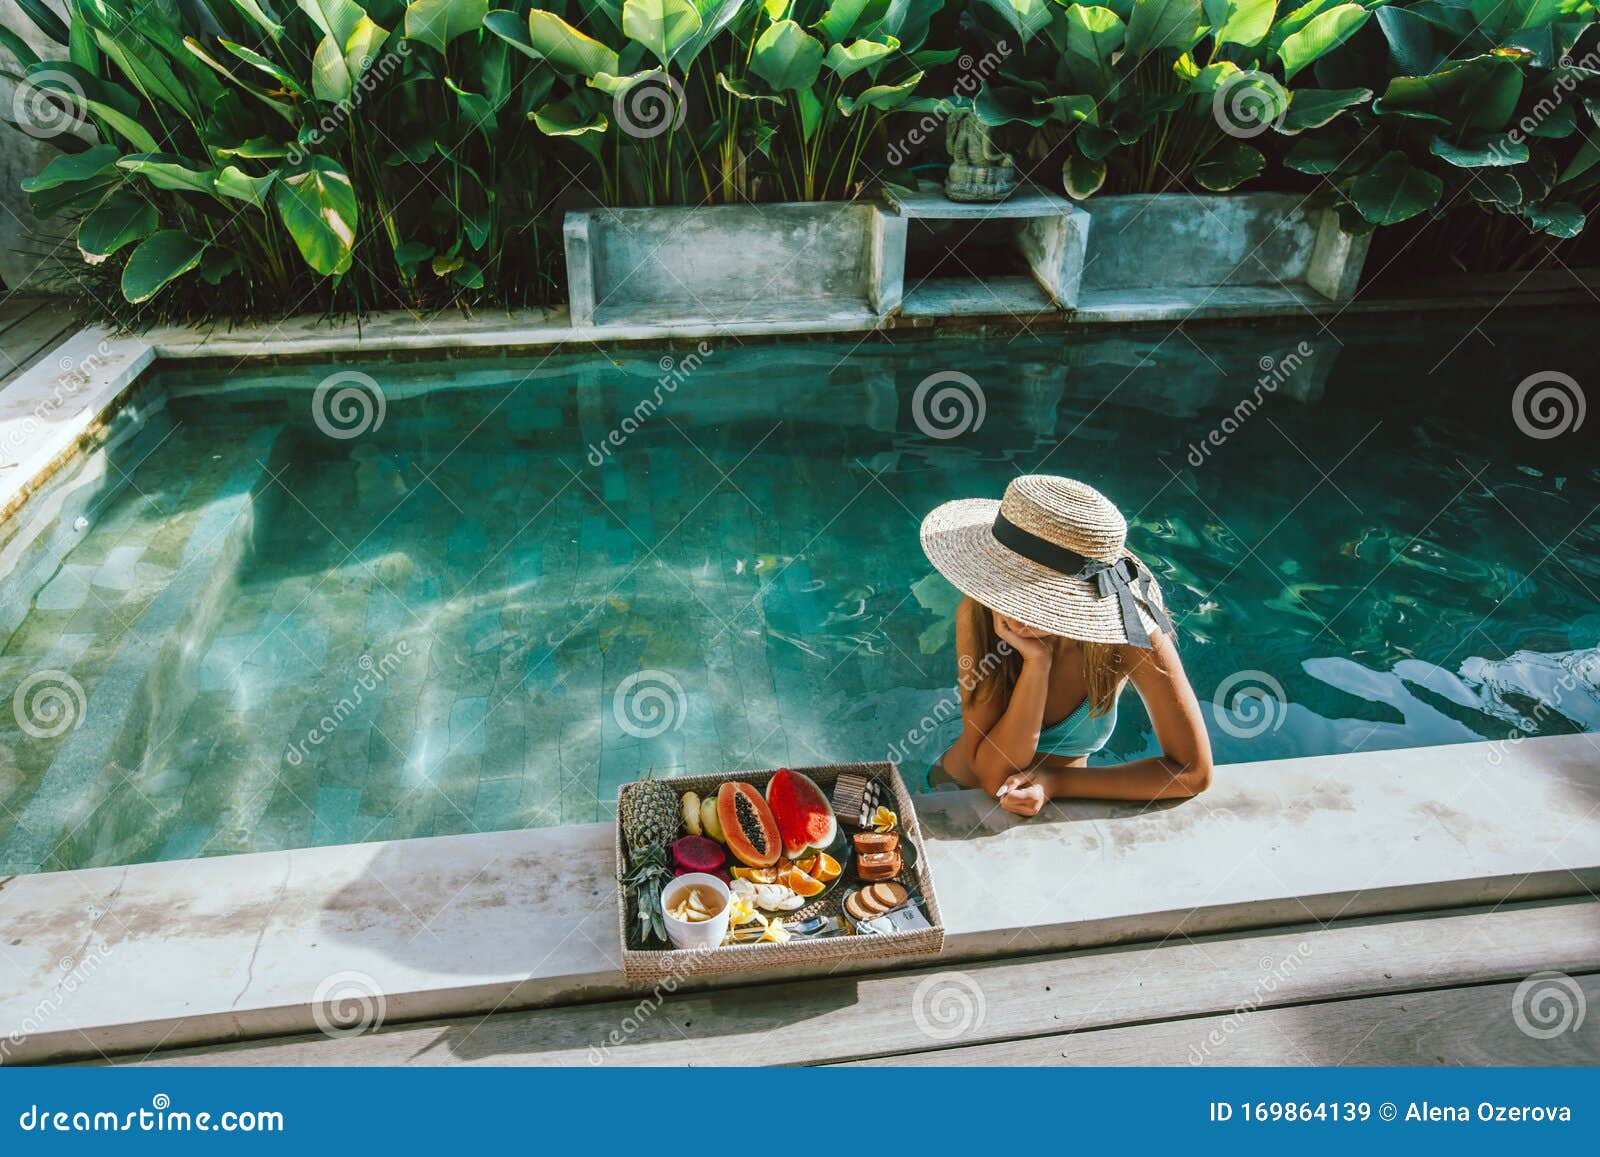 girl relaxing and eating fruits in the pool on luxury villa in bali